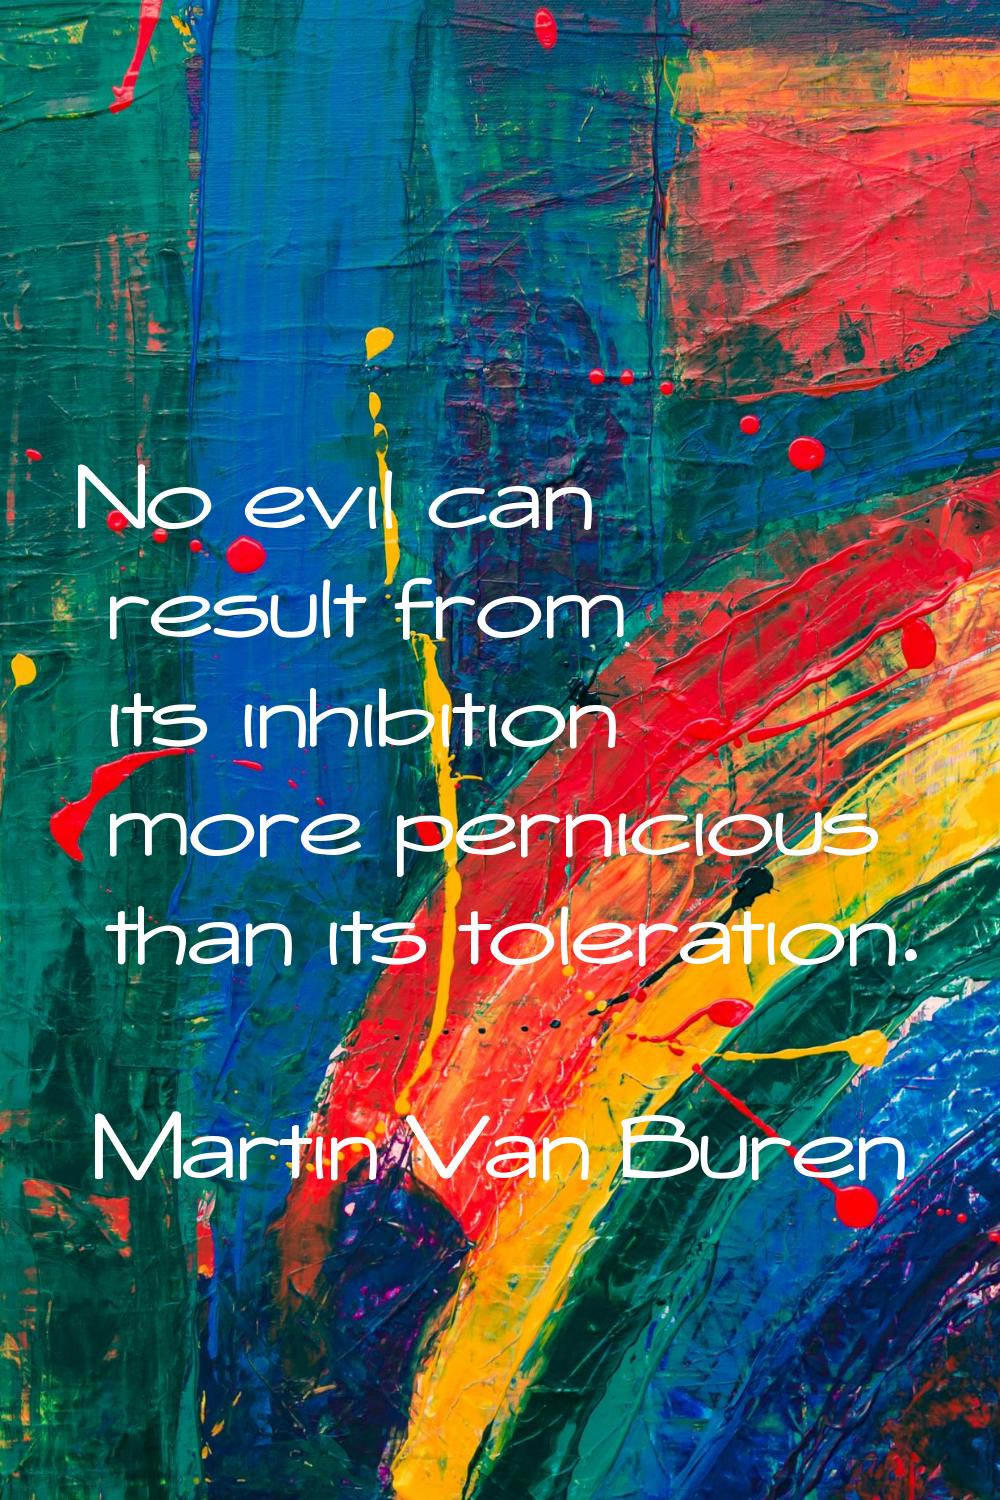 No evil can result from its inhibition more pernicious than its toleration.